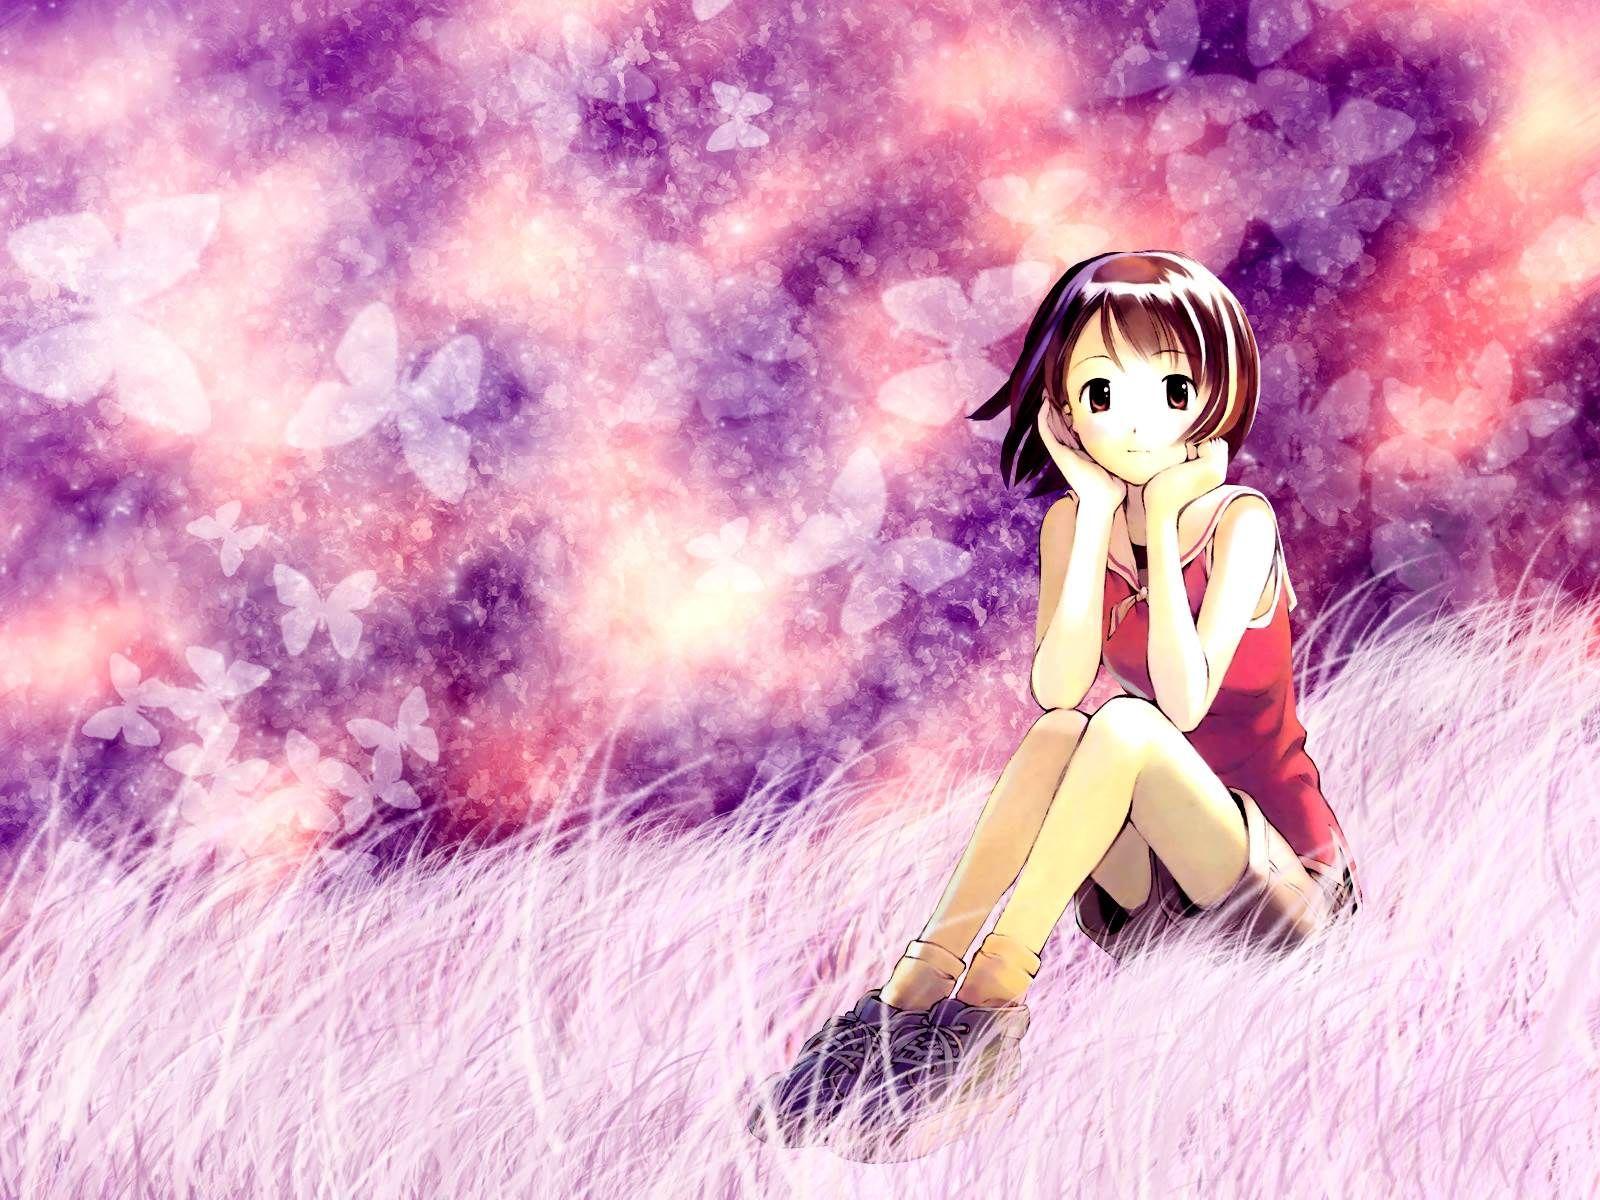 Collection of Animated Girls Wallpaper on HDWallpaper 1600